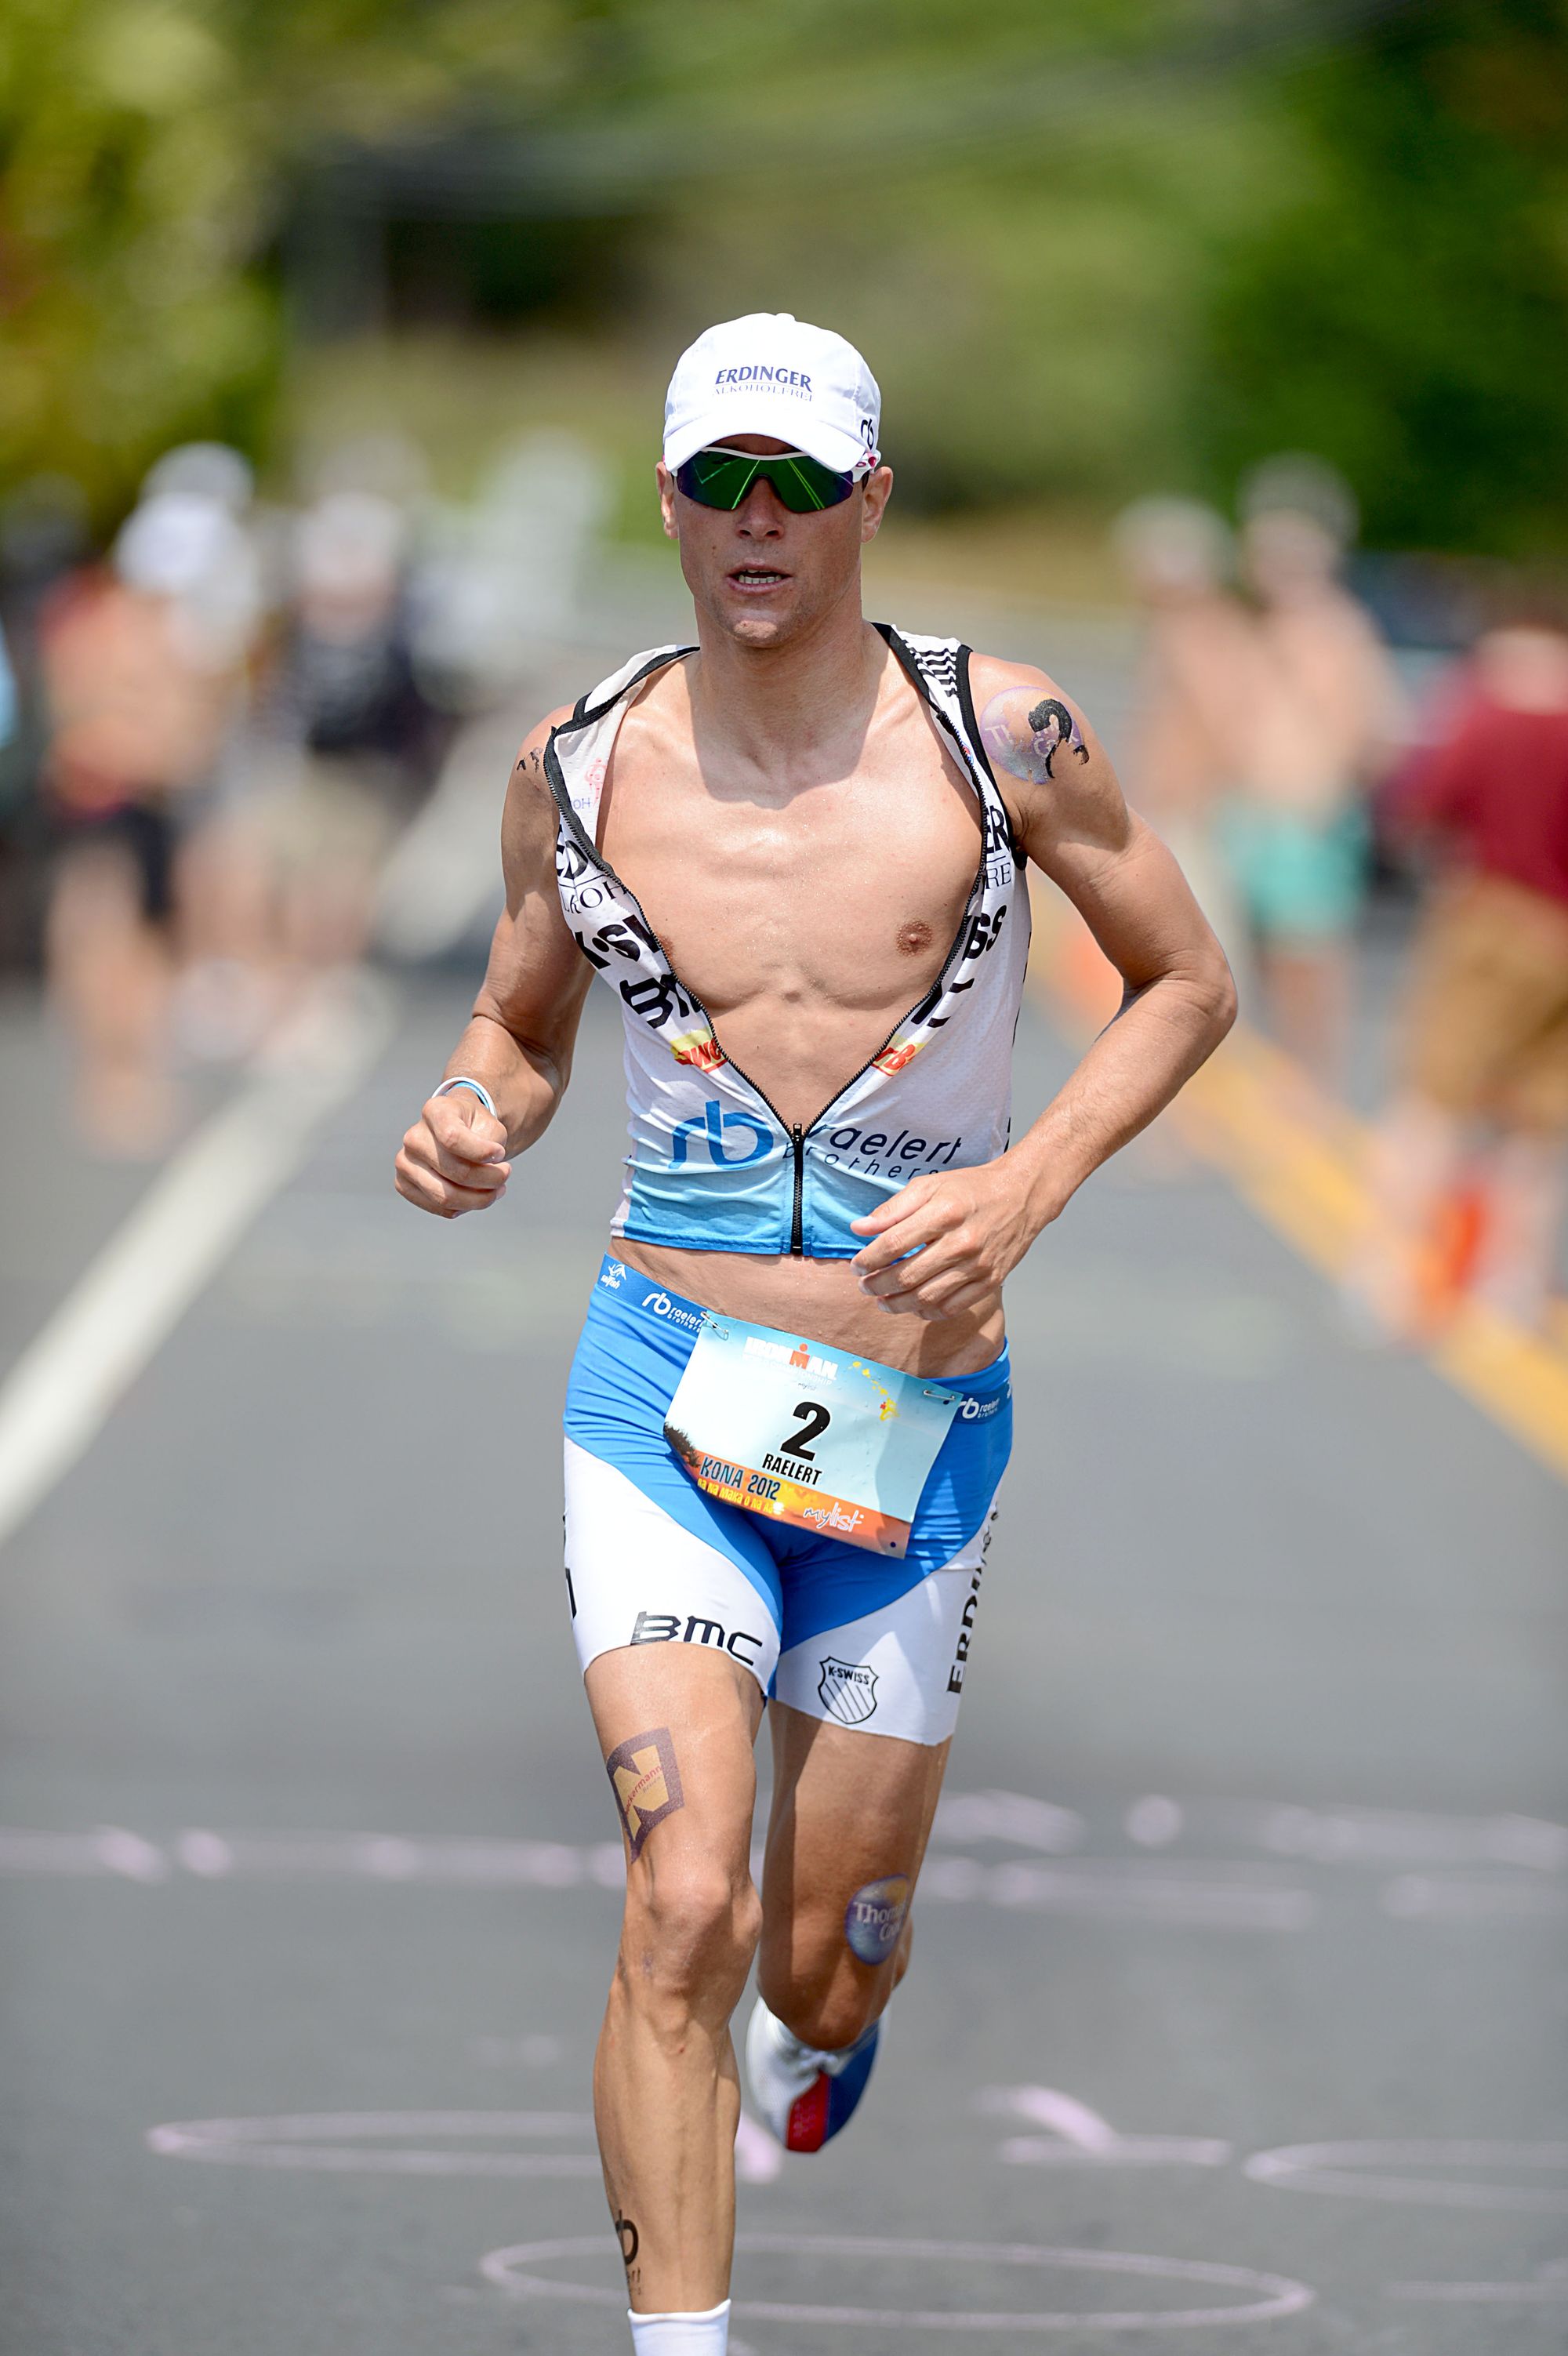 Michael Ralert is currently training in Lennox Head with the Aeromax Team in preparation for Ironman 70.3 Ballarat